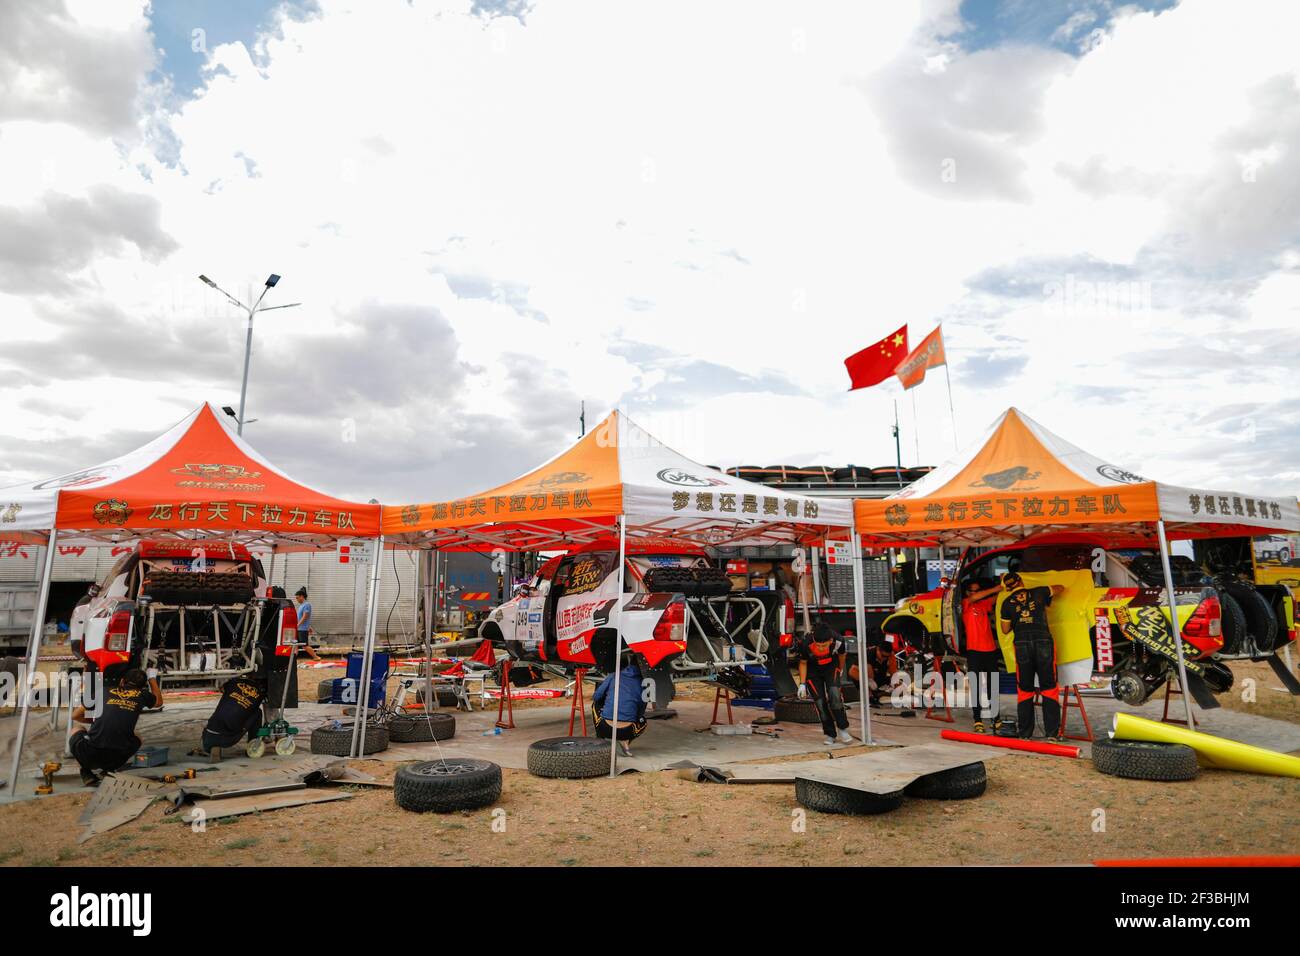 249 ZHANG Peng (CHN), TONG Zhenrong (CHN), TEAM SOARING DRAGON, LXTX, OPEN, during the Silk Way 2019 Off Road rally, stage 5, july 11, ULAANBAATAR - MANDALGOVI, Mongolia - Photo Frederic Le Floc'h / DPPI Stock Photo